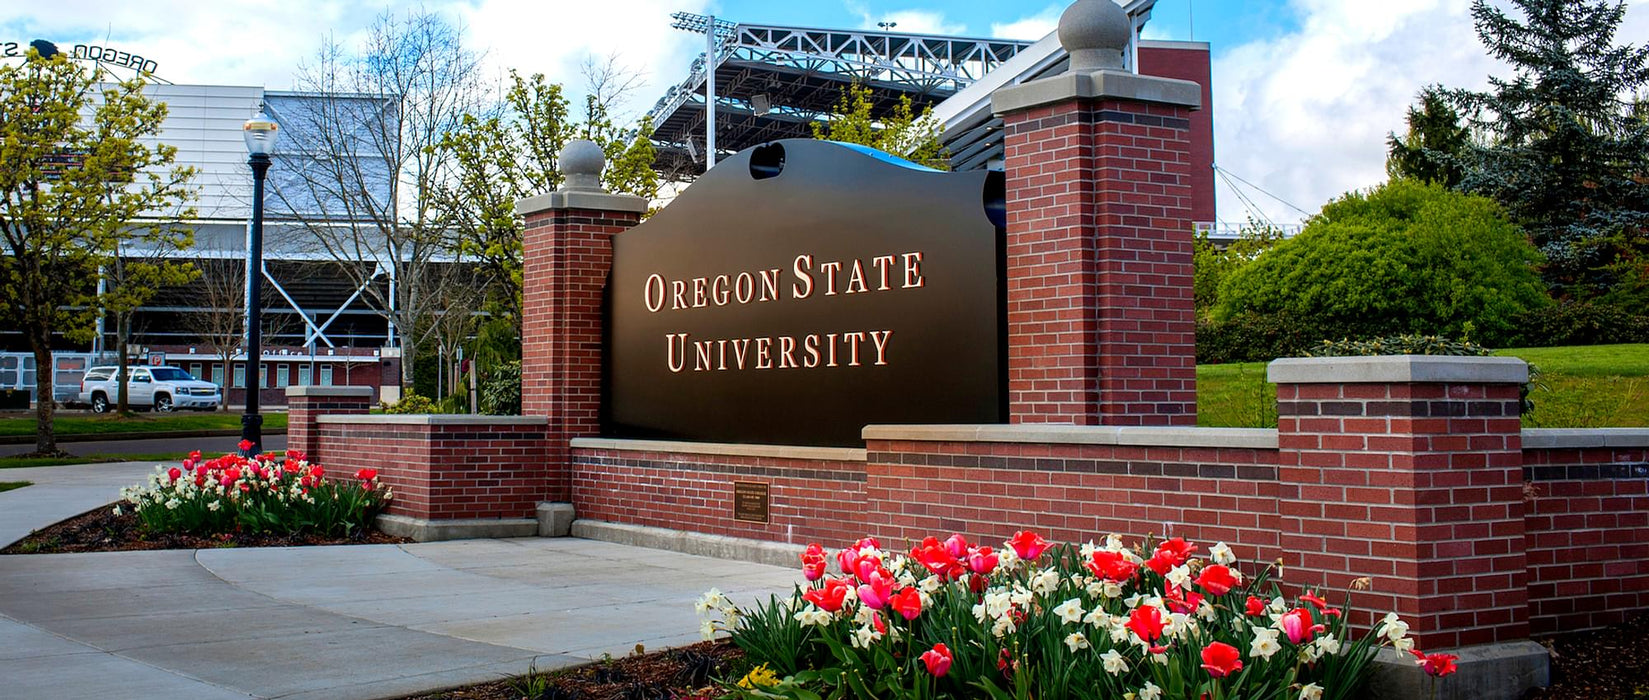 Graduate Pathway - Environmental Engineering (3-Semester Pathway) Transfer to Master of Engineering - Environmental Engineering at Oregon State University - Corvallis: Tuition: $31,350.00 USD/year (Scholarship Available)